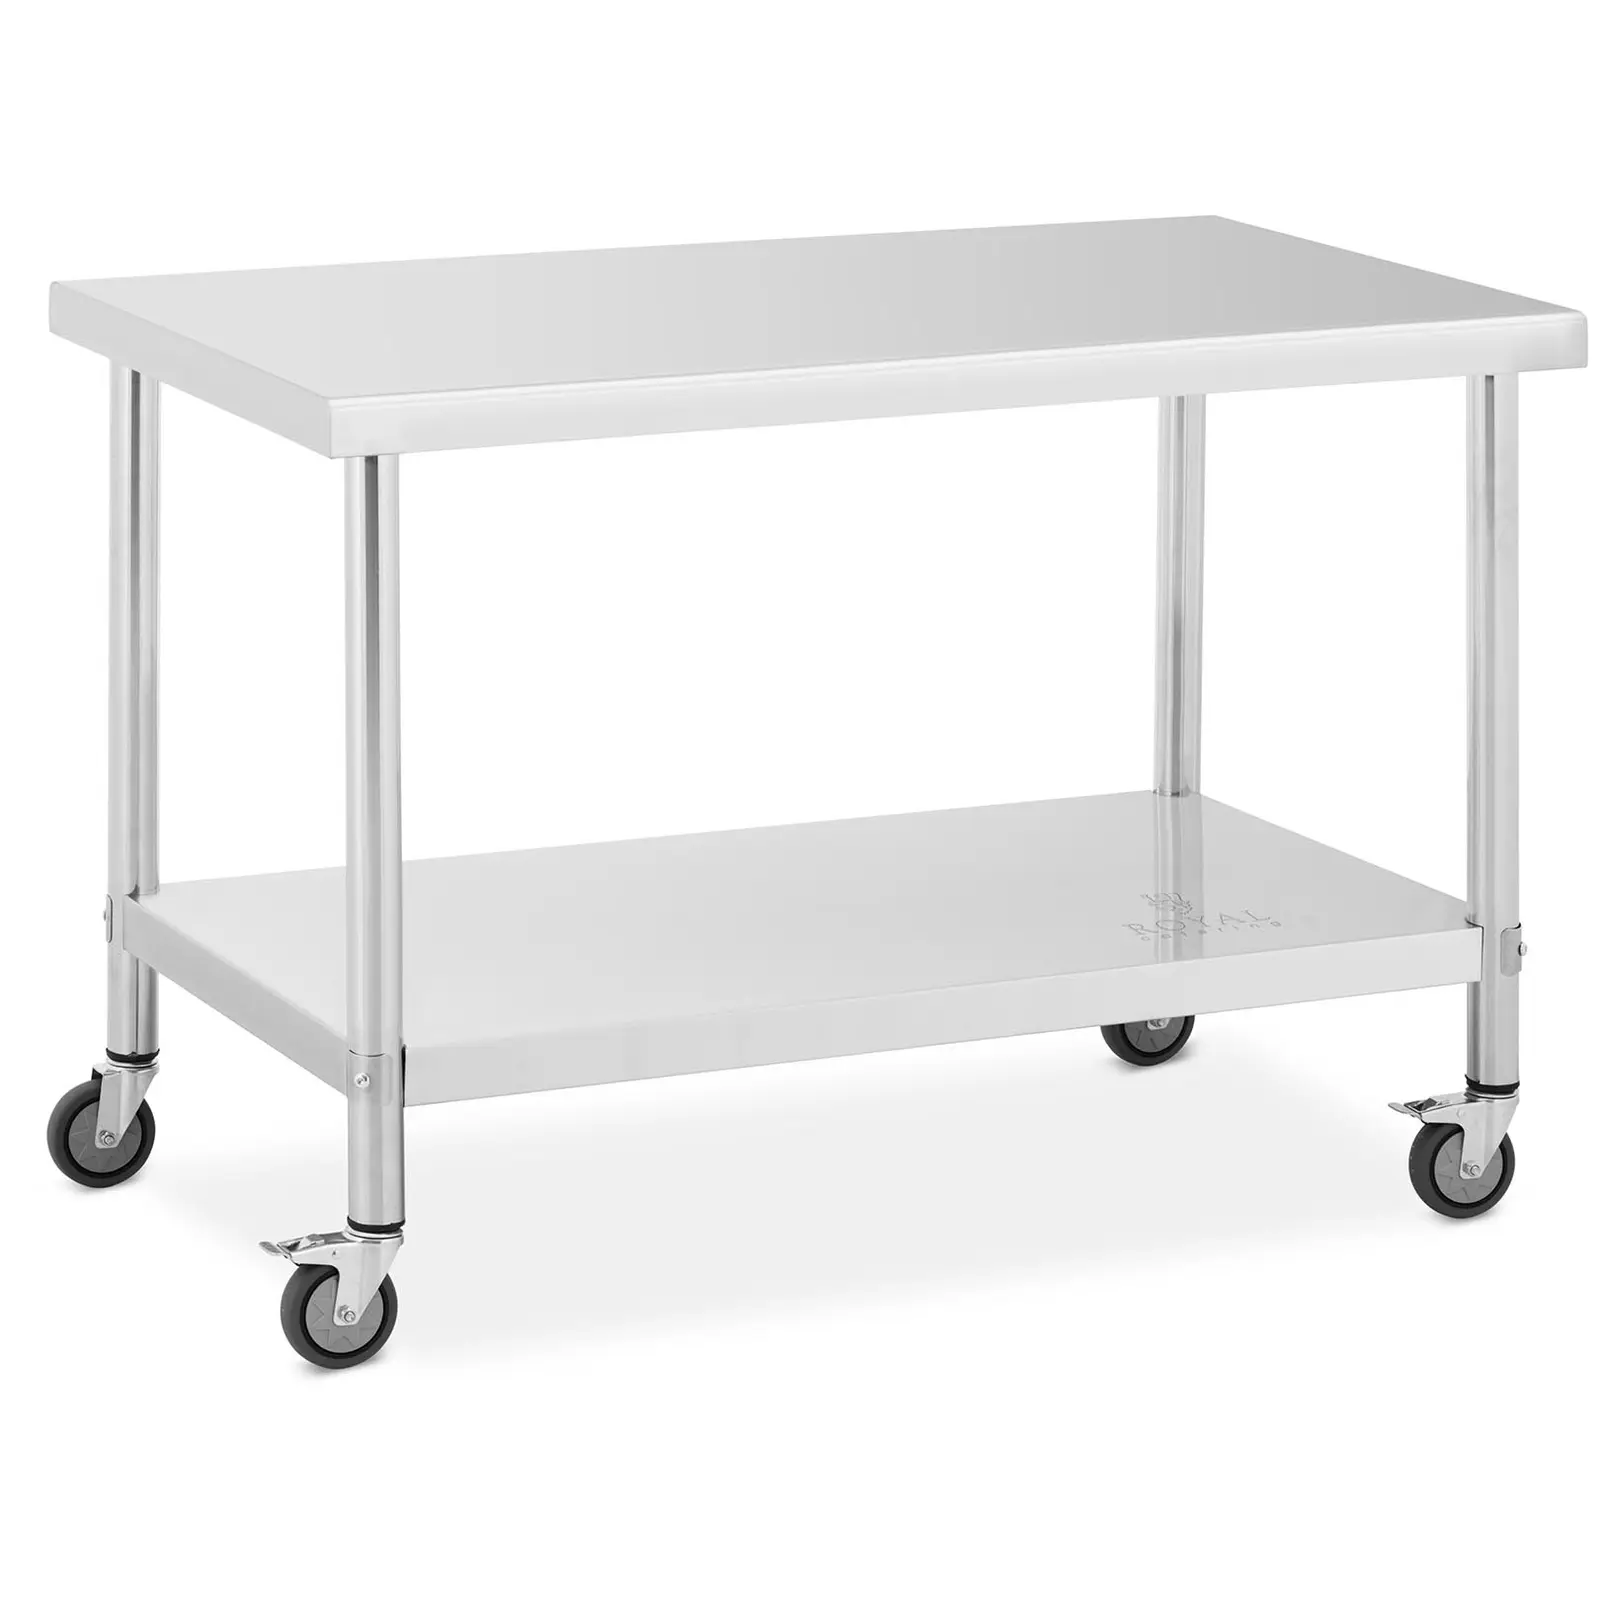 Wheeled work bench - 70 x 120 cm - 158 kg load capacity - Royal Catering